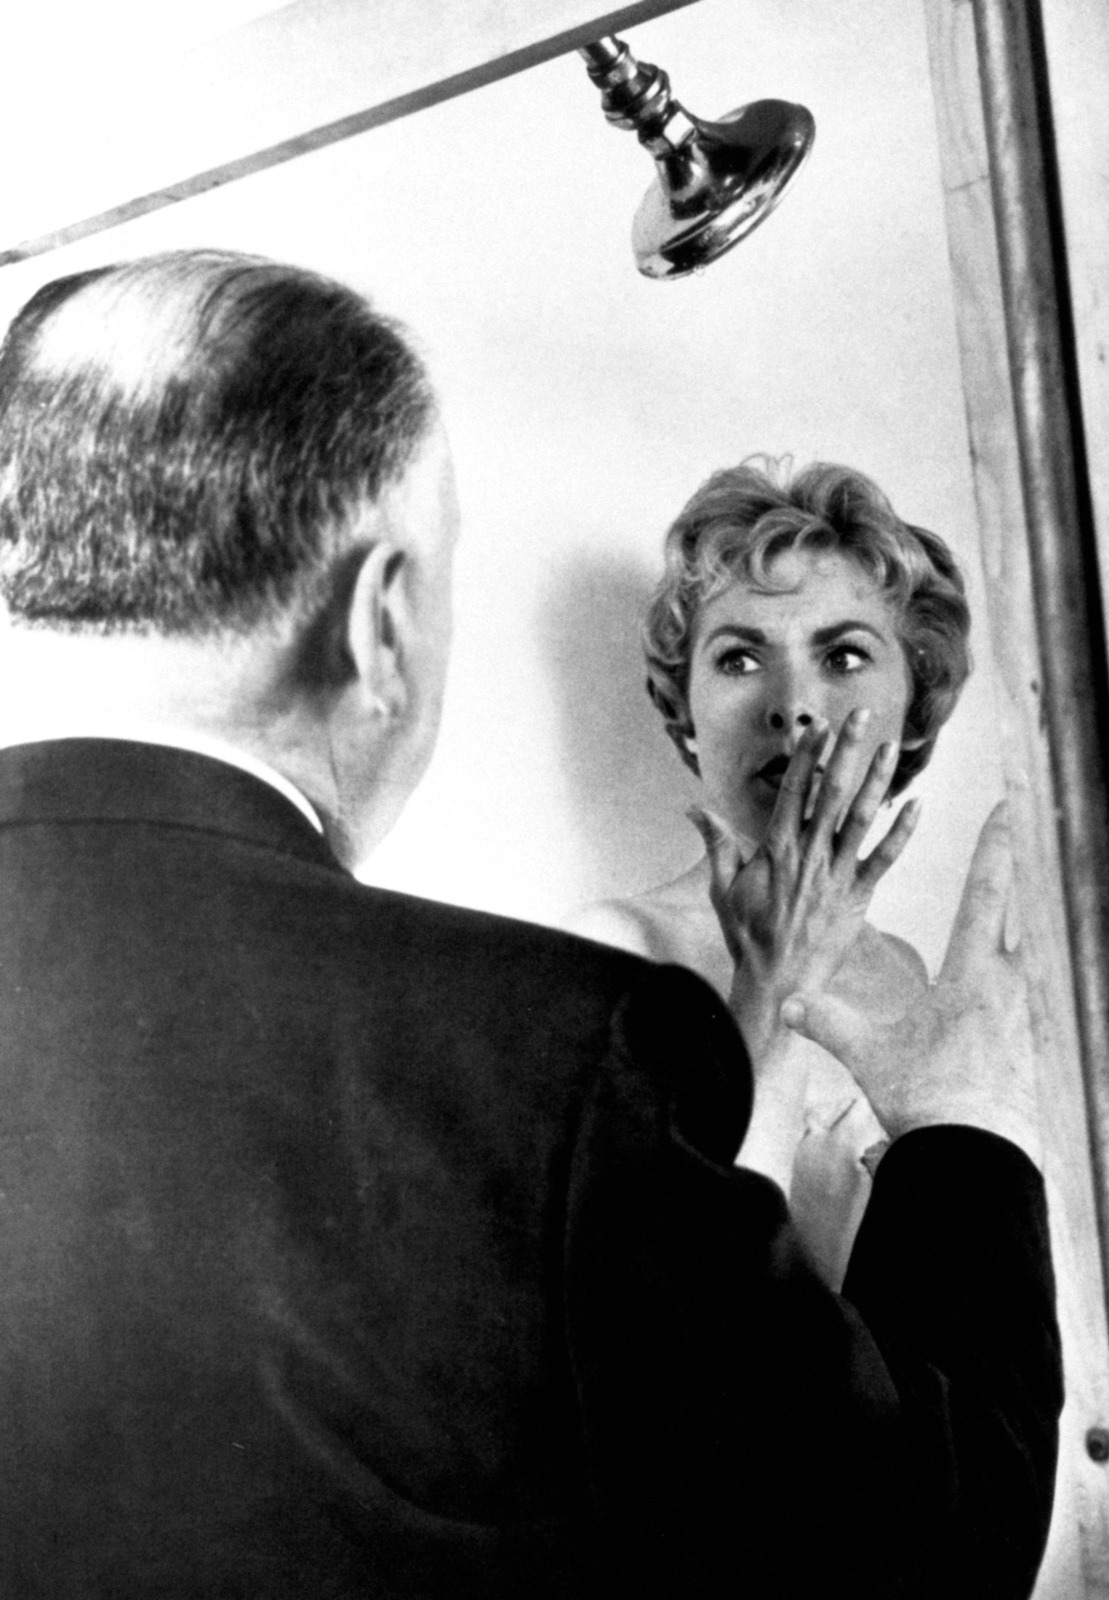  Director Alfred Hitchcock directing Janet Leigh in the famous shower scene from